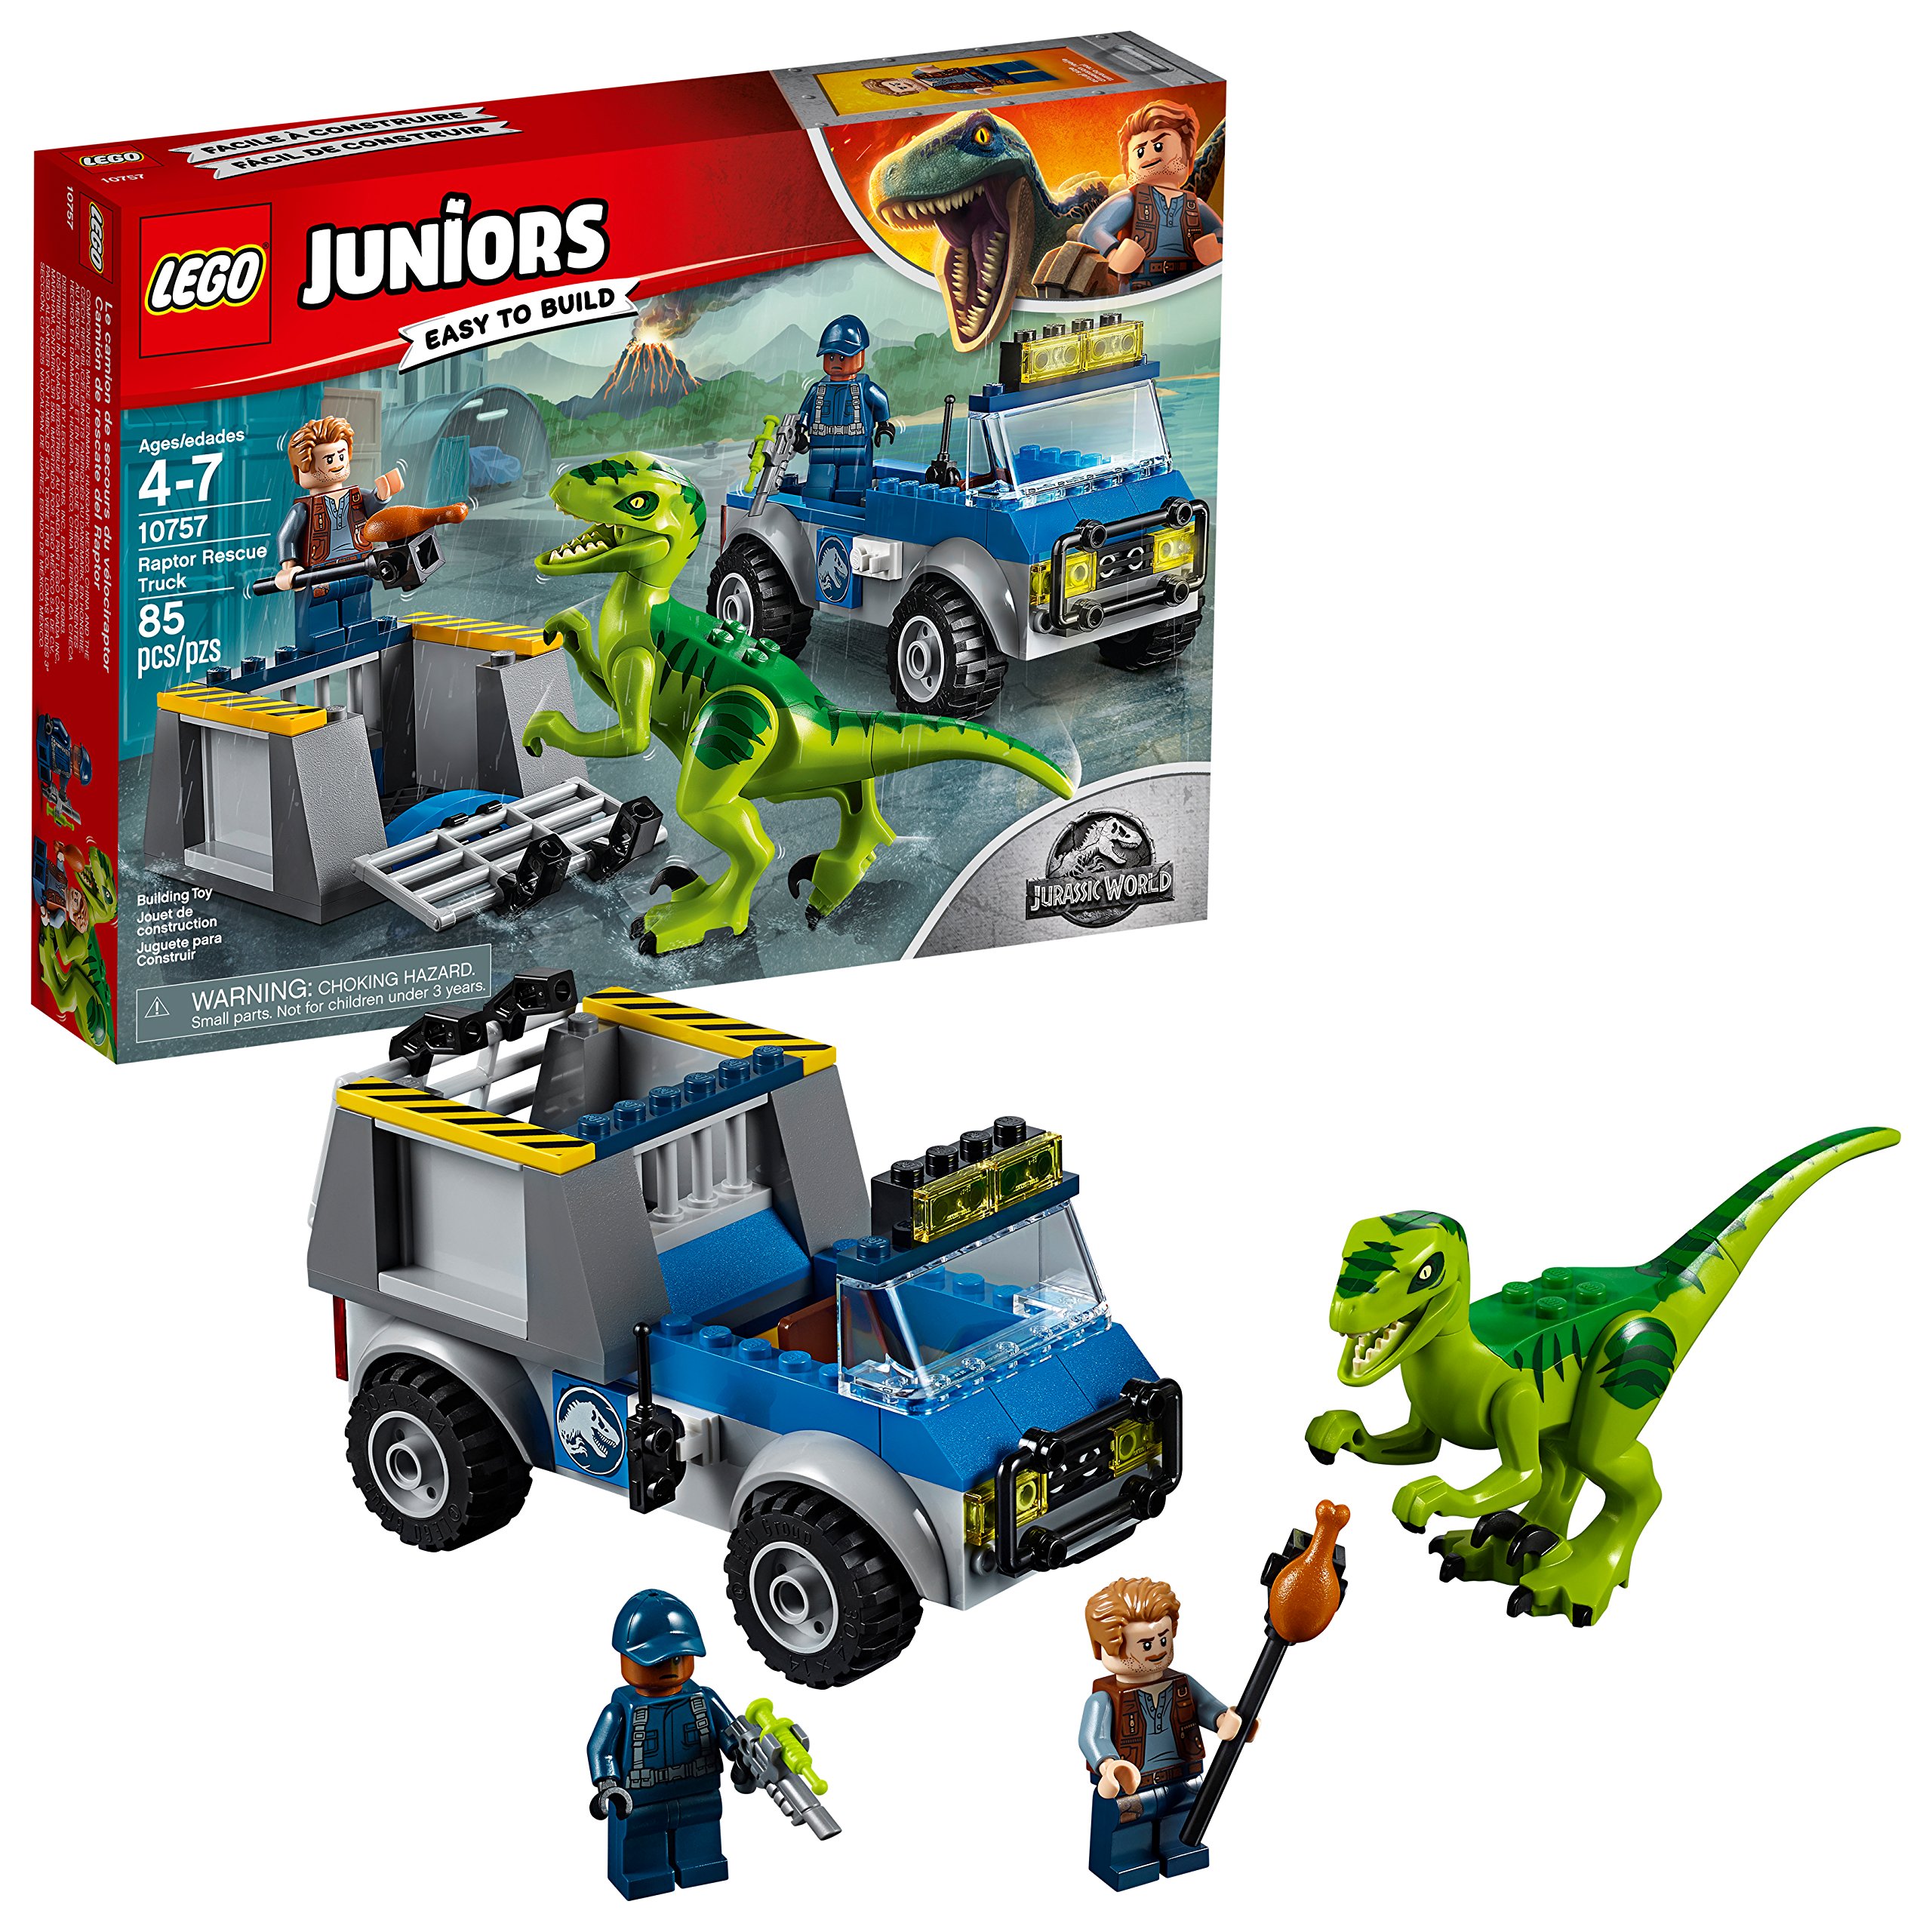 Book Cover LEGO Juniors/4+ Jurassic World Raptor Rescue Truck 10757 Building Kit (85 Pieces) (Discontinued by Manufacturer)